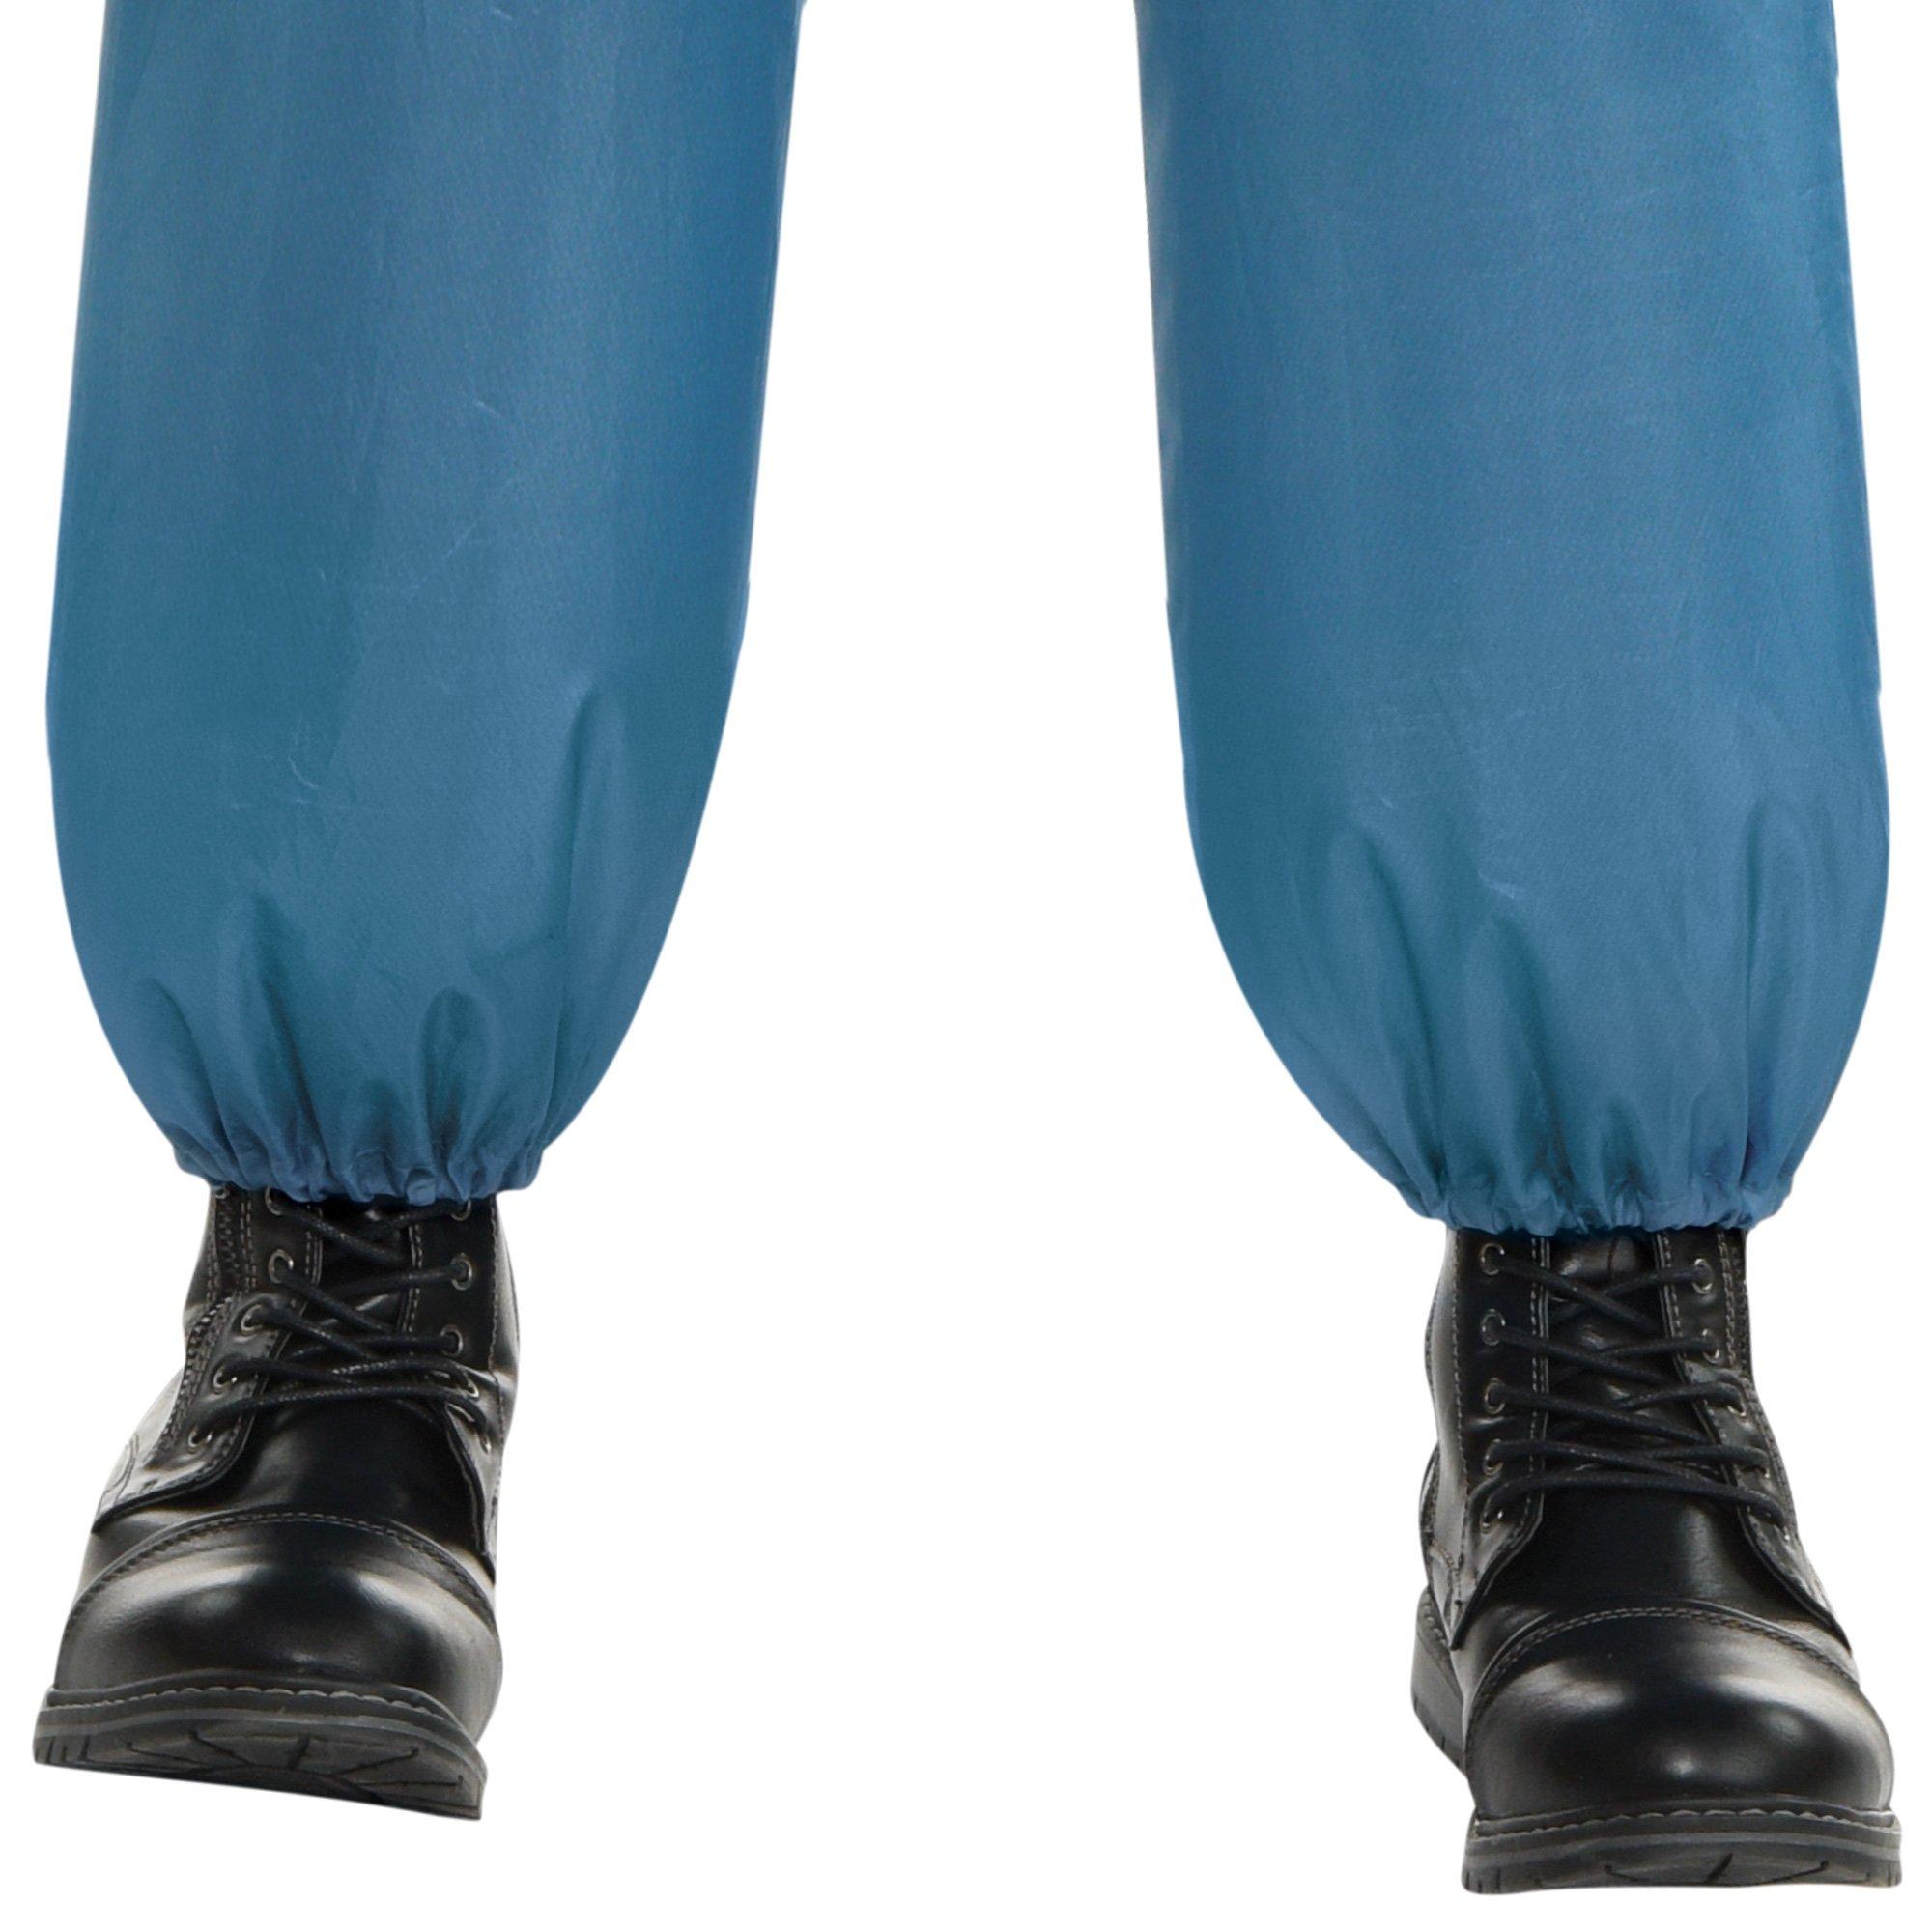 Otto Minion Inflatable Costume for Adults - The Rise of Gru